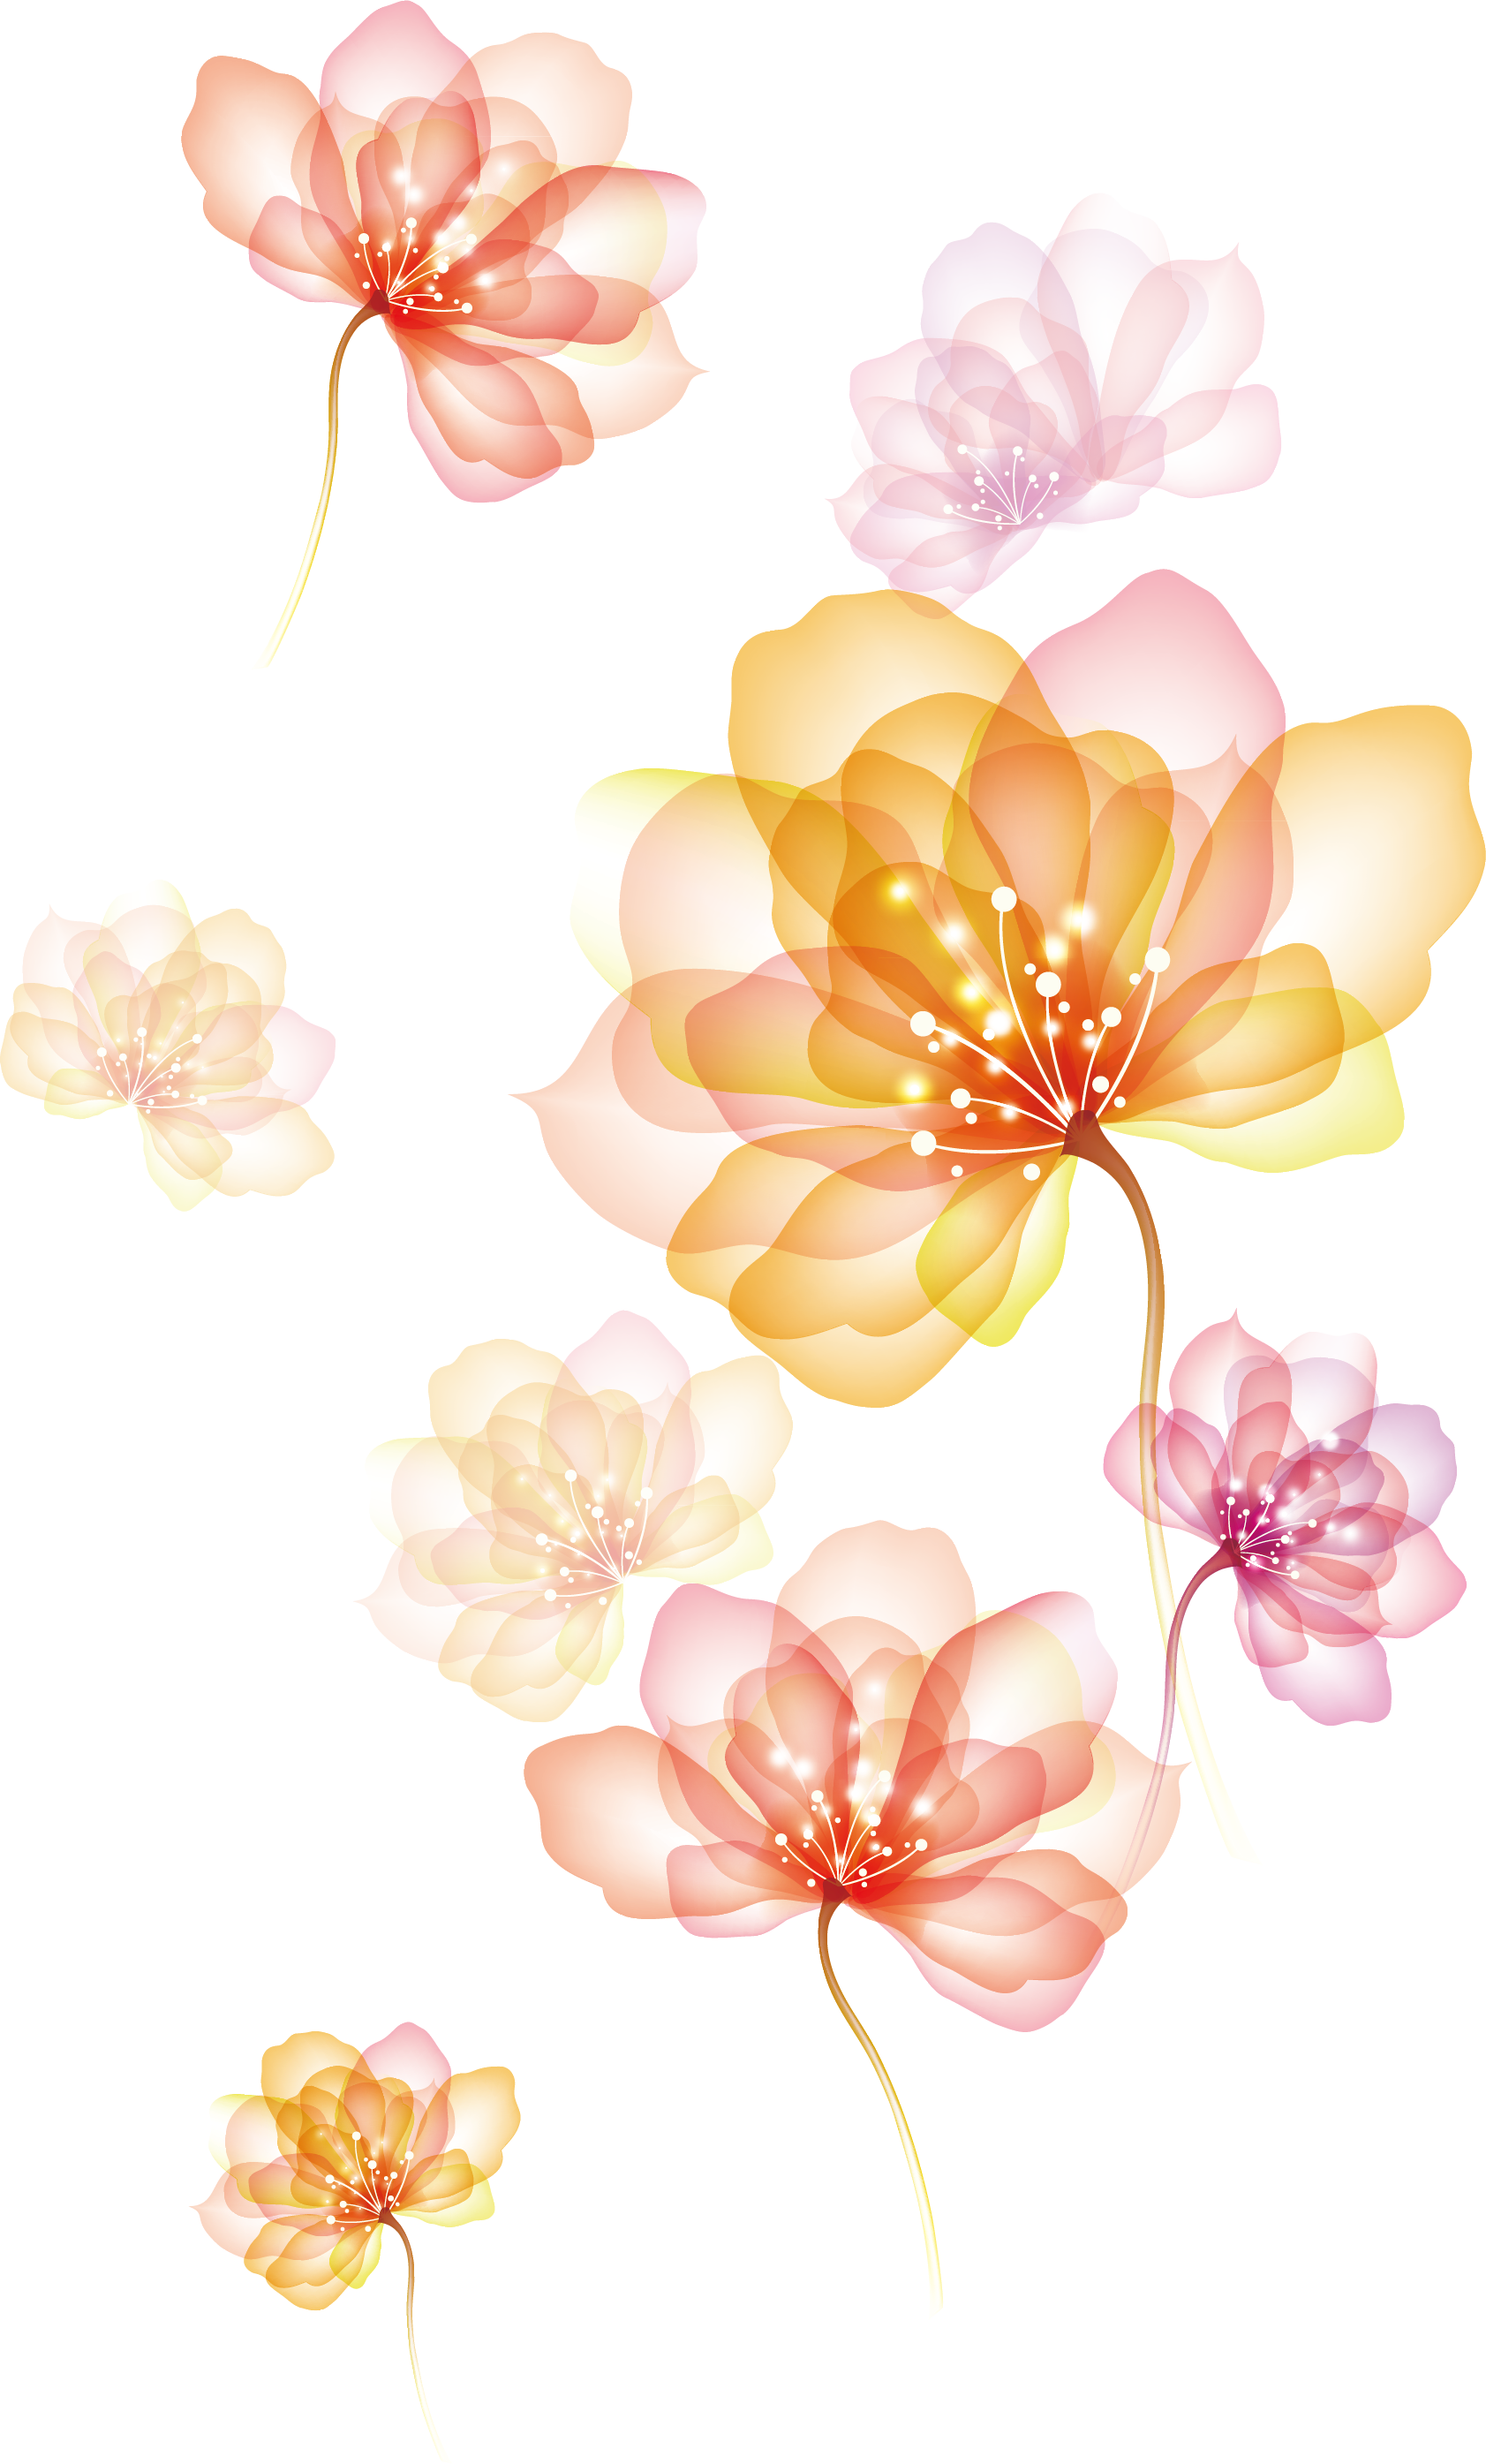 Of Spreading Flowers Effect Download Free Image PNG Image